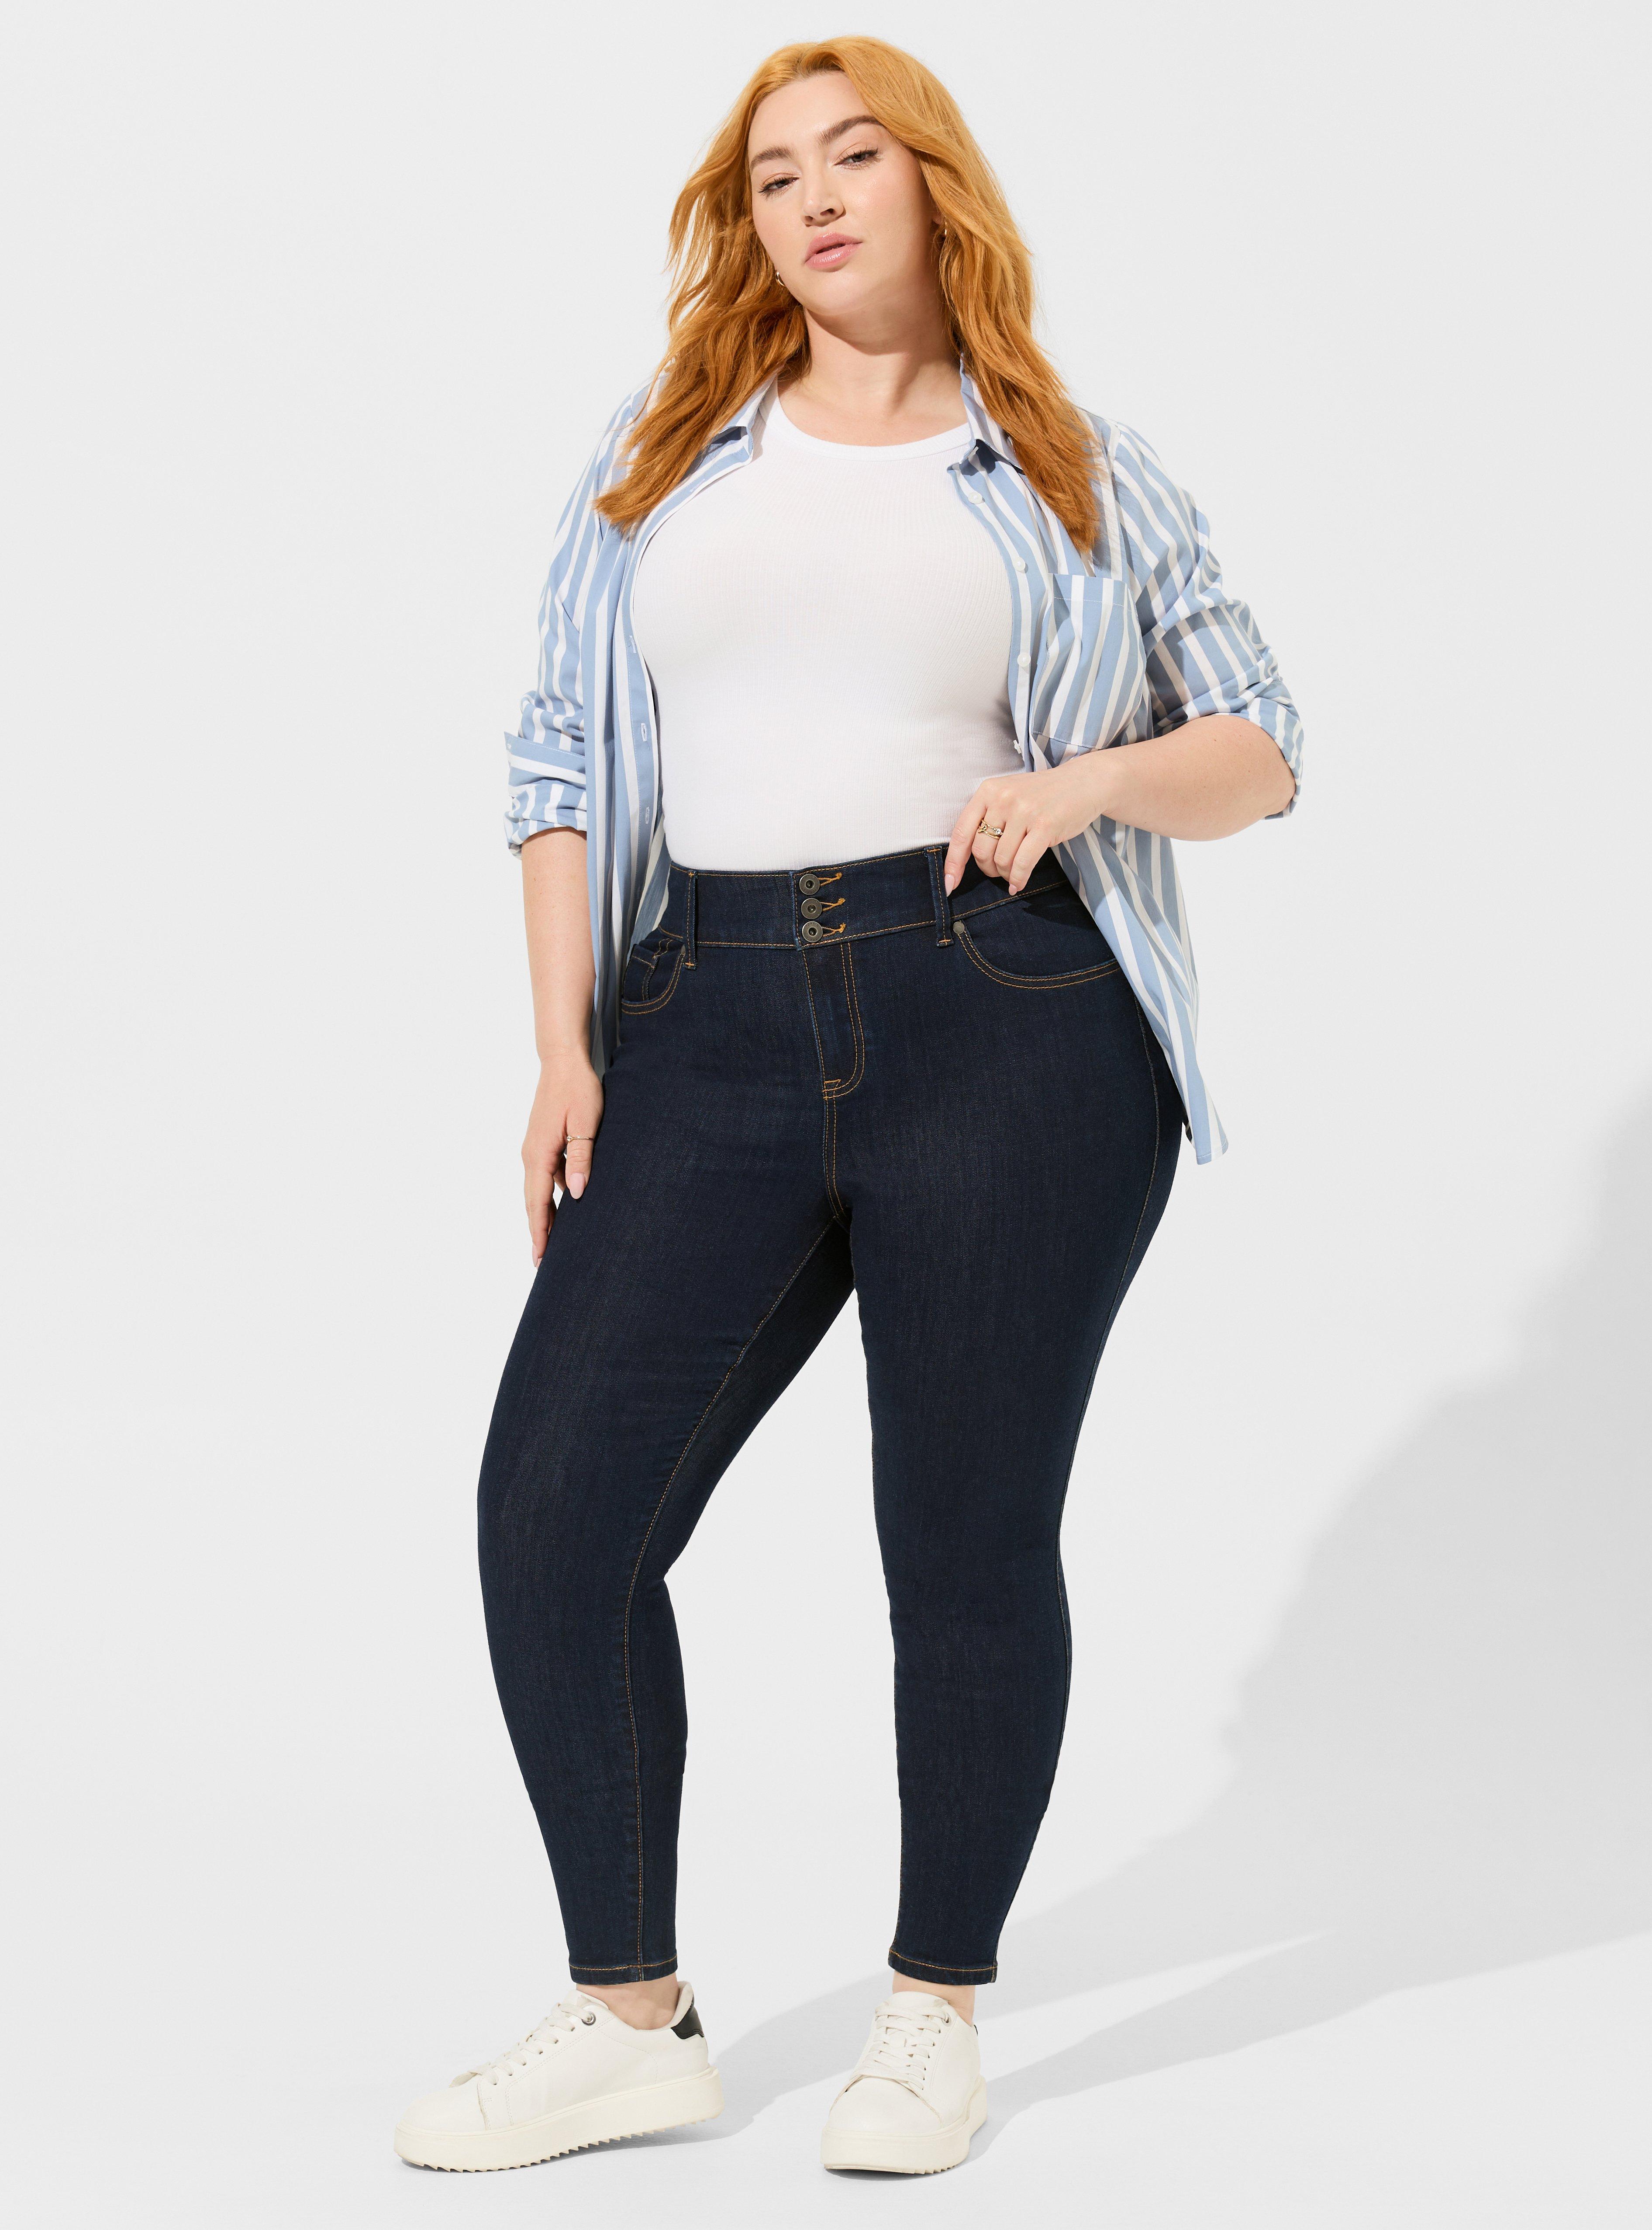 The Upside High-Waisted Midi Legging  Urban Outfitters New Zealand -  Clothing, Music, Home & Accessories